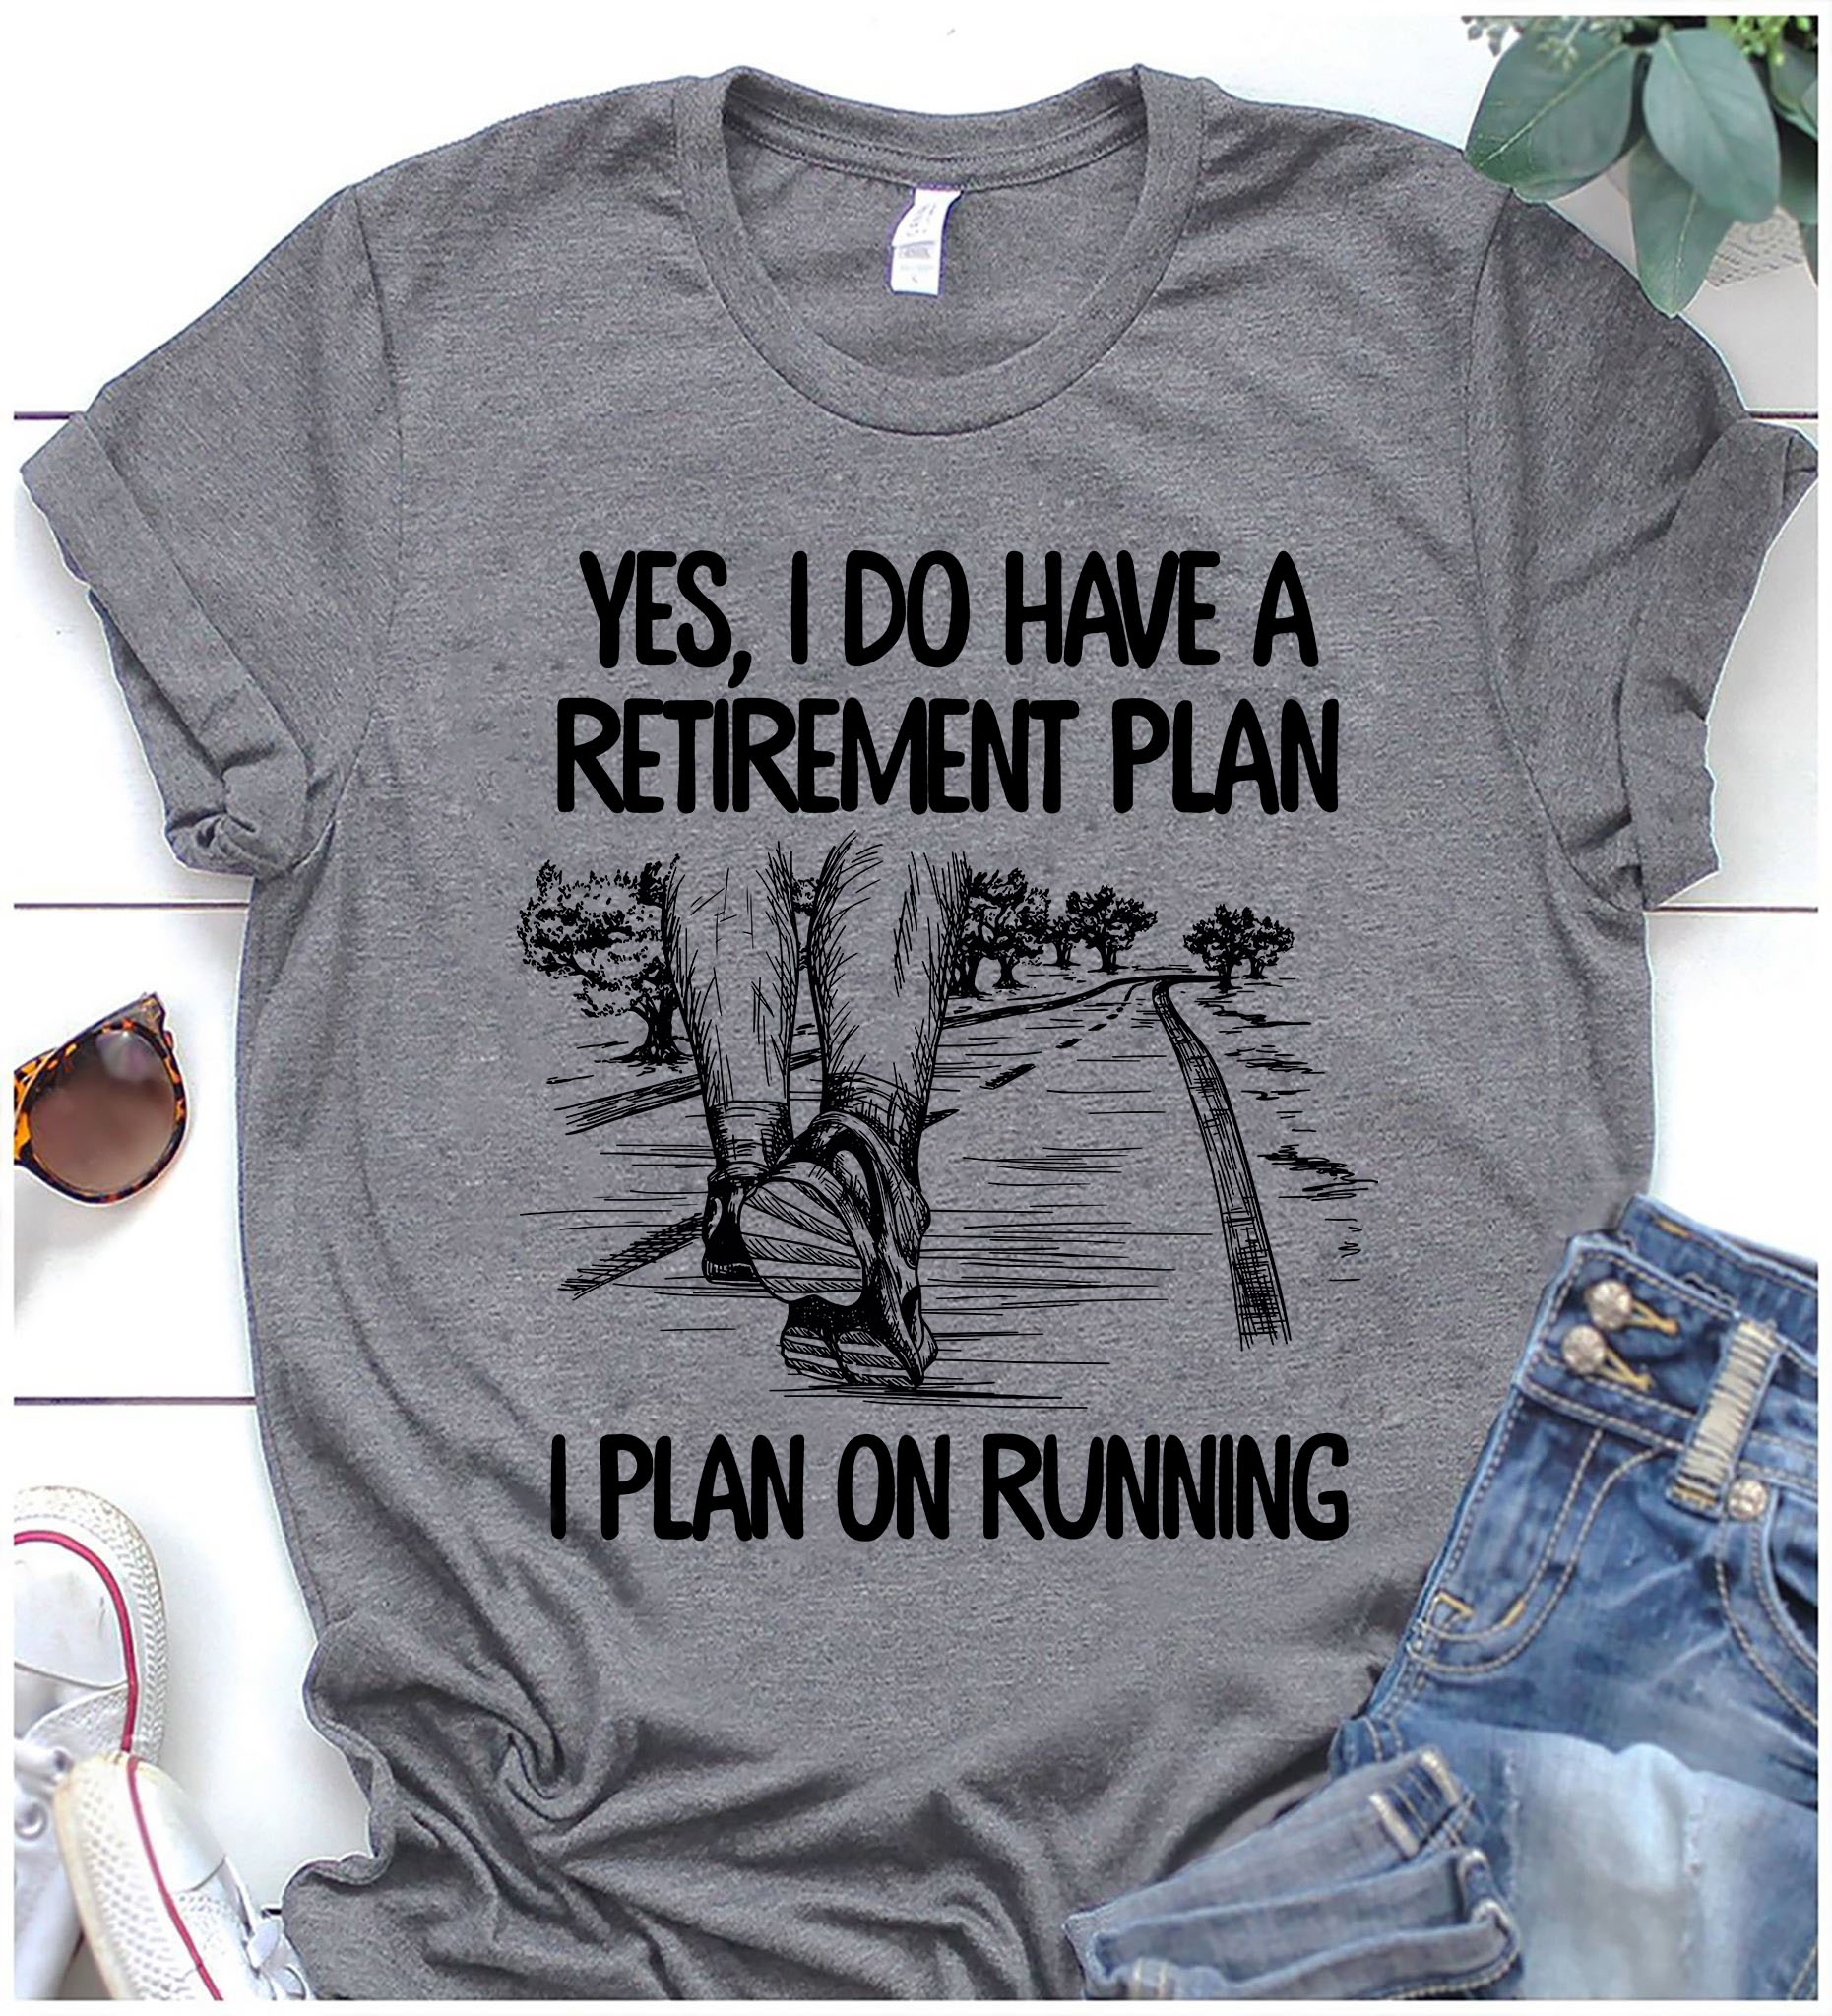 Yes, I do have a retirement plan I plan on running